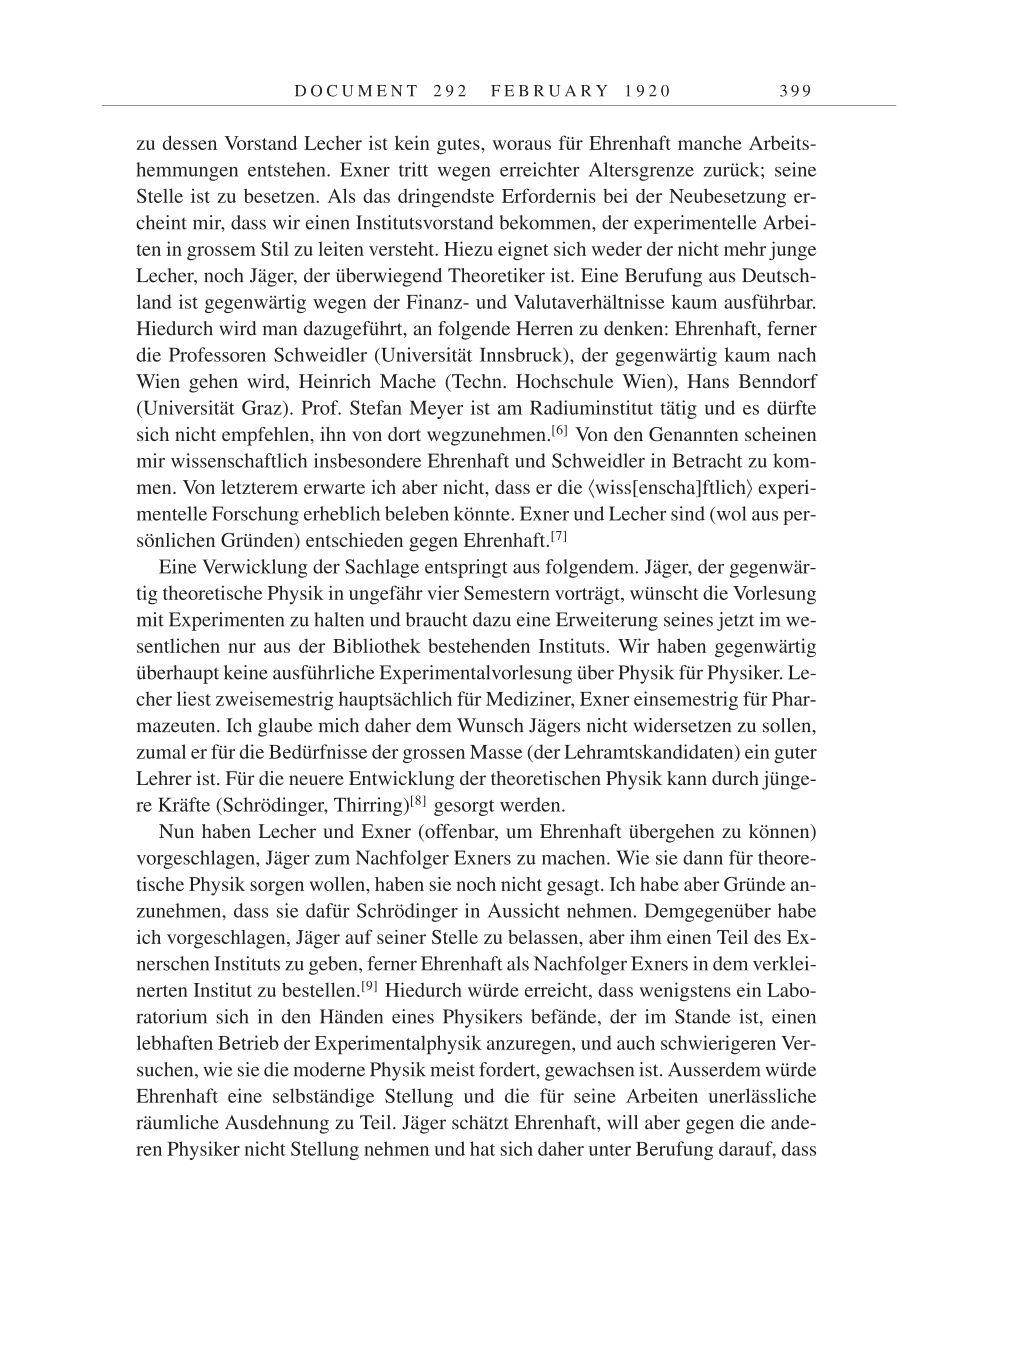 Volume 9: The Berlin Years: Correspondence January 1919-April 1920 page 399